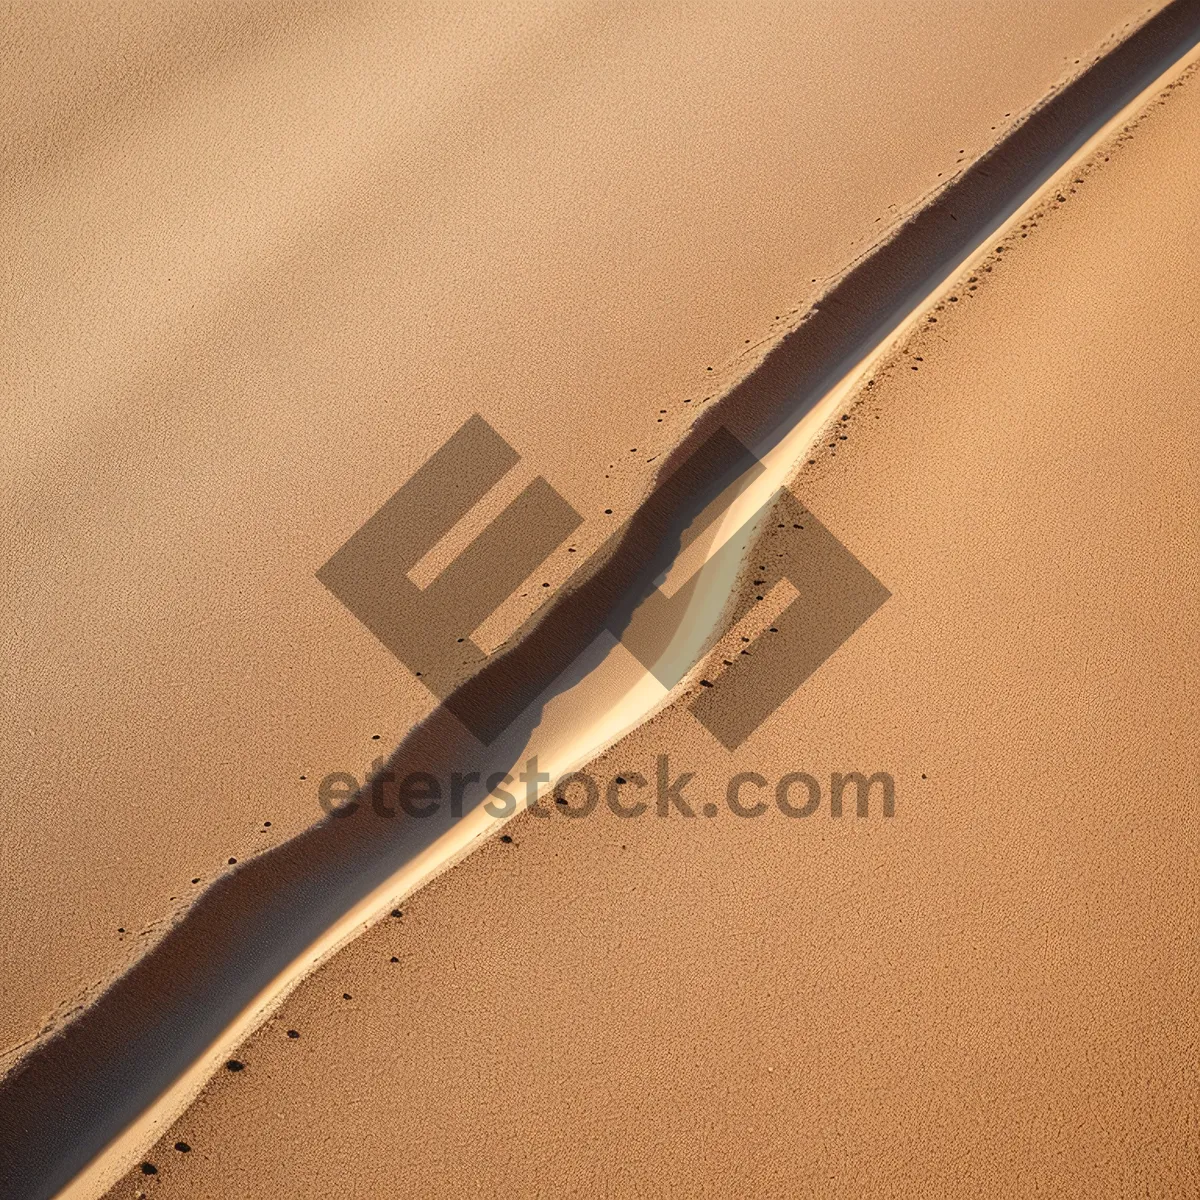 Picture of Metal Ladle and Knife Blade in Vessel